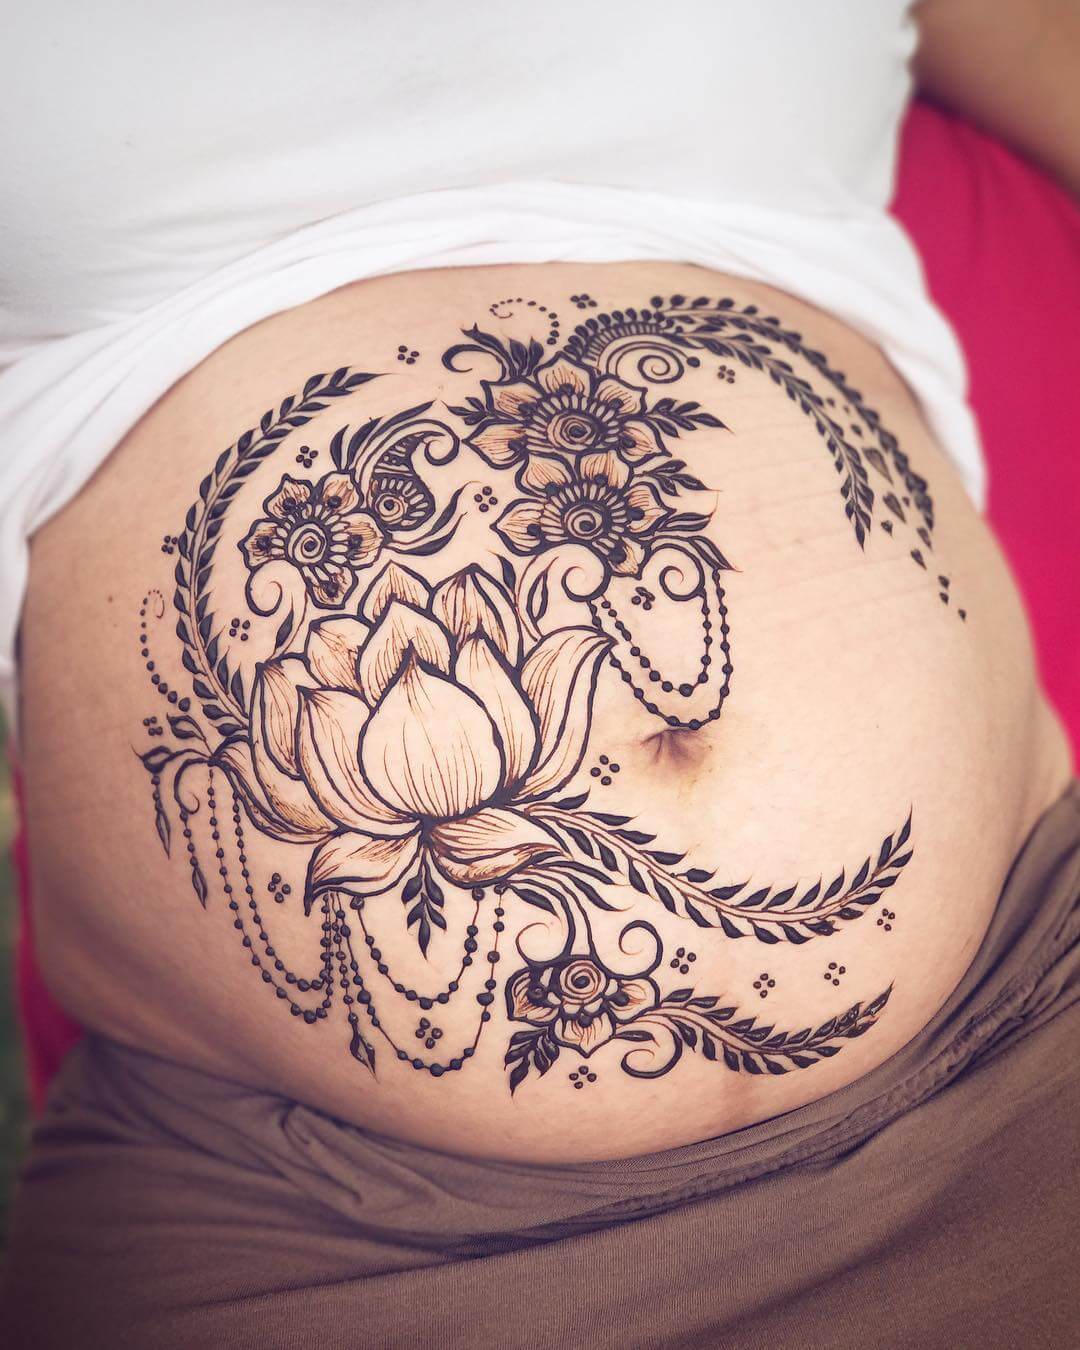 Mesmerizing Lotus and Vines Amazing Pregnant Belly Henna Designs